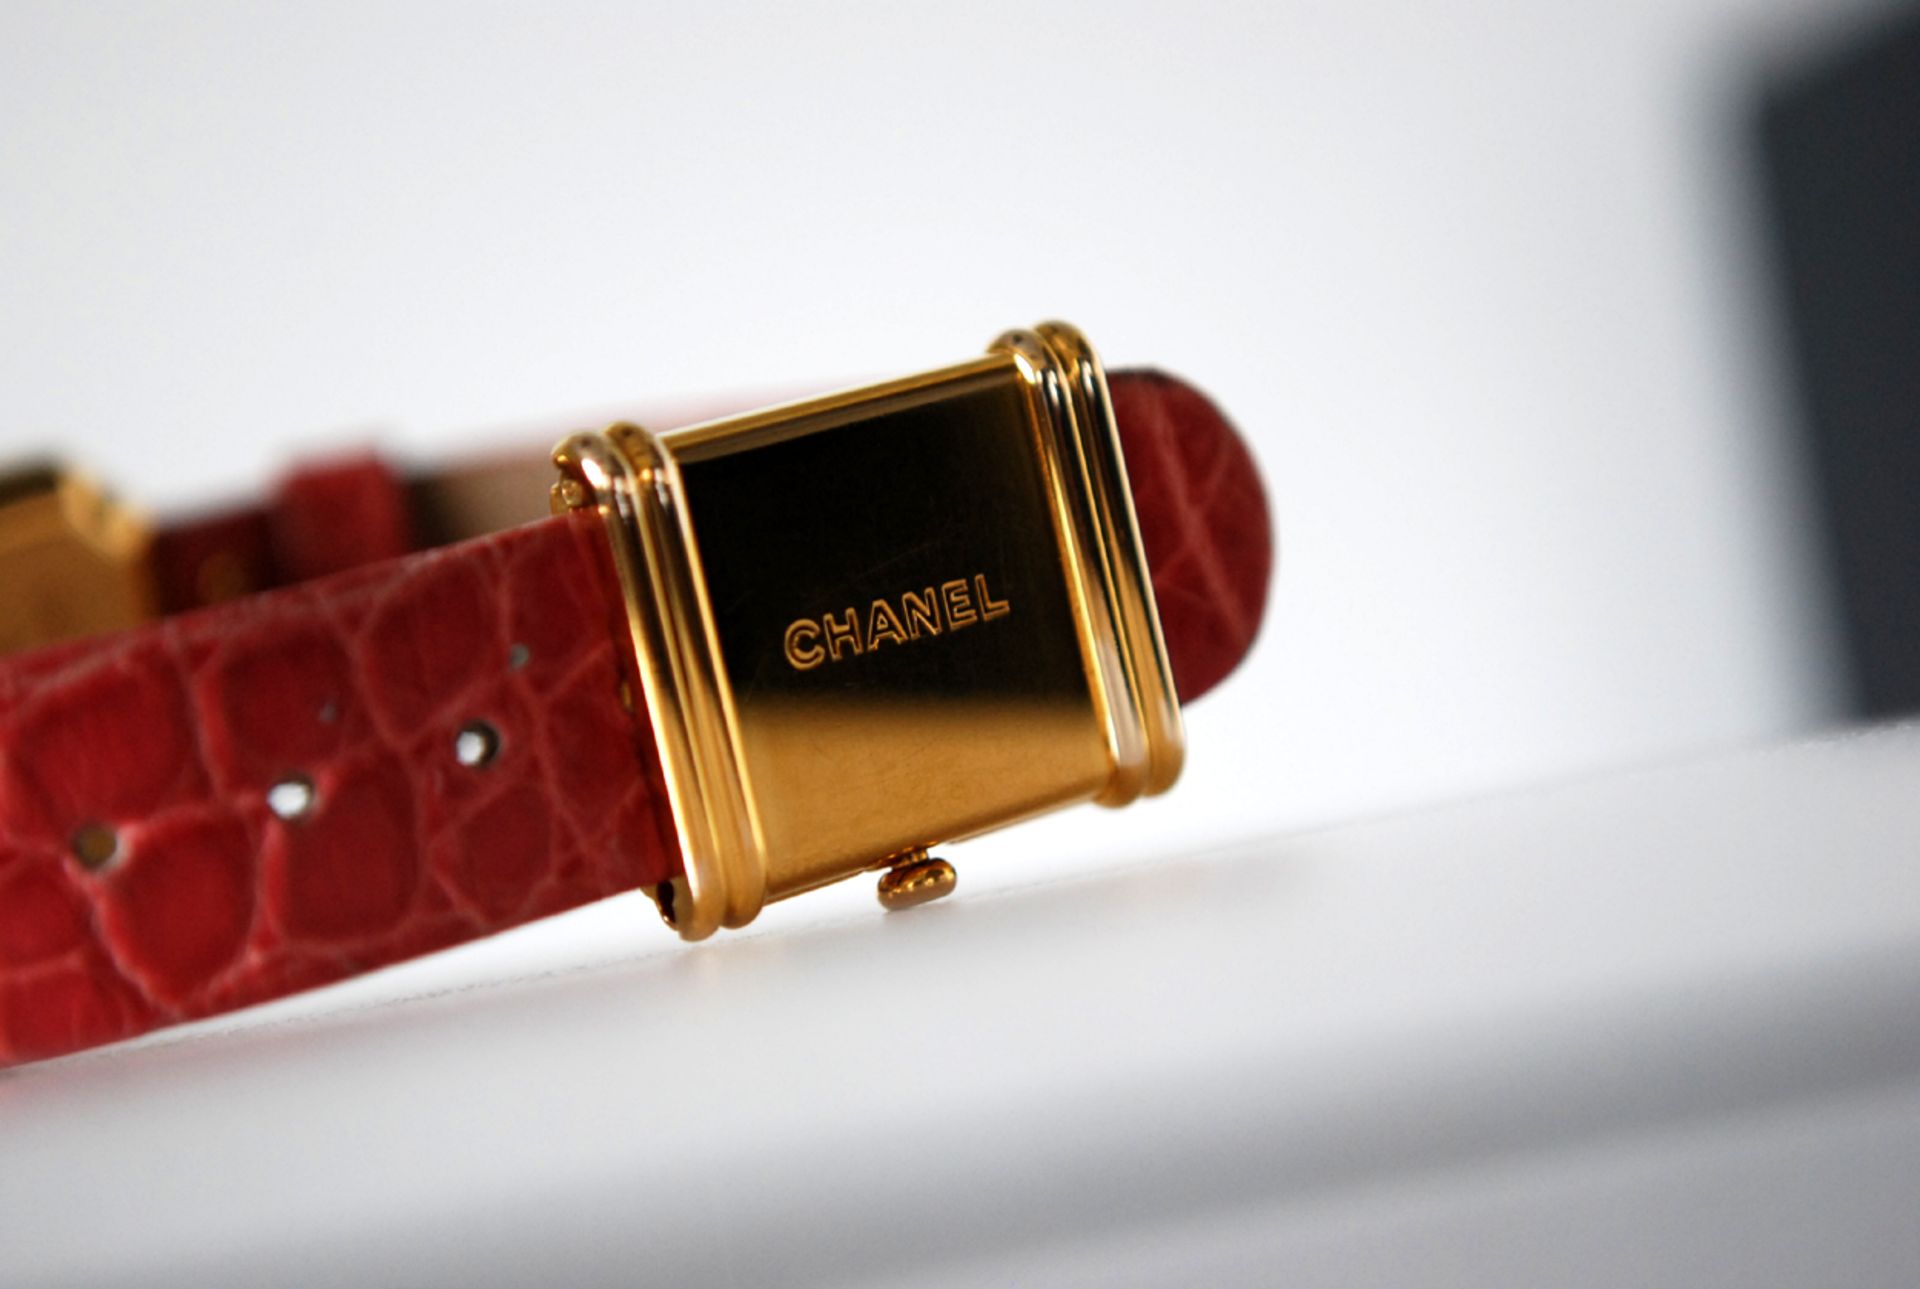 CHANEL – PREMIERE 18k GOLD Stunningly Beautiful Watch - Condition: *Please see imagery* - Image 9 of 15